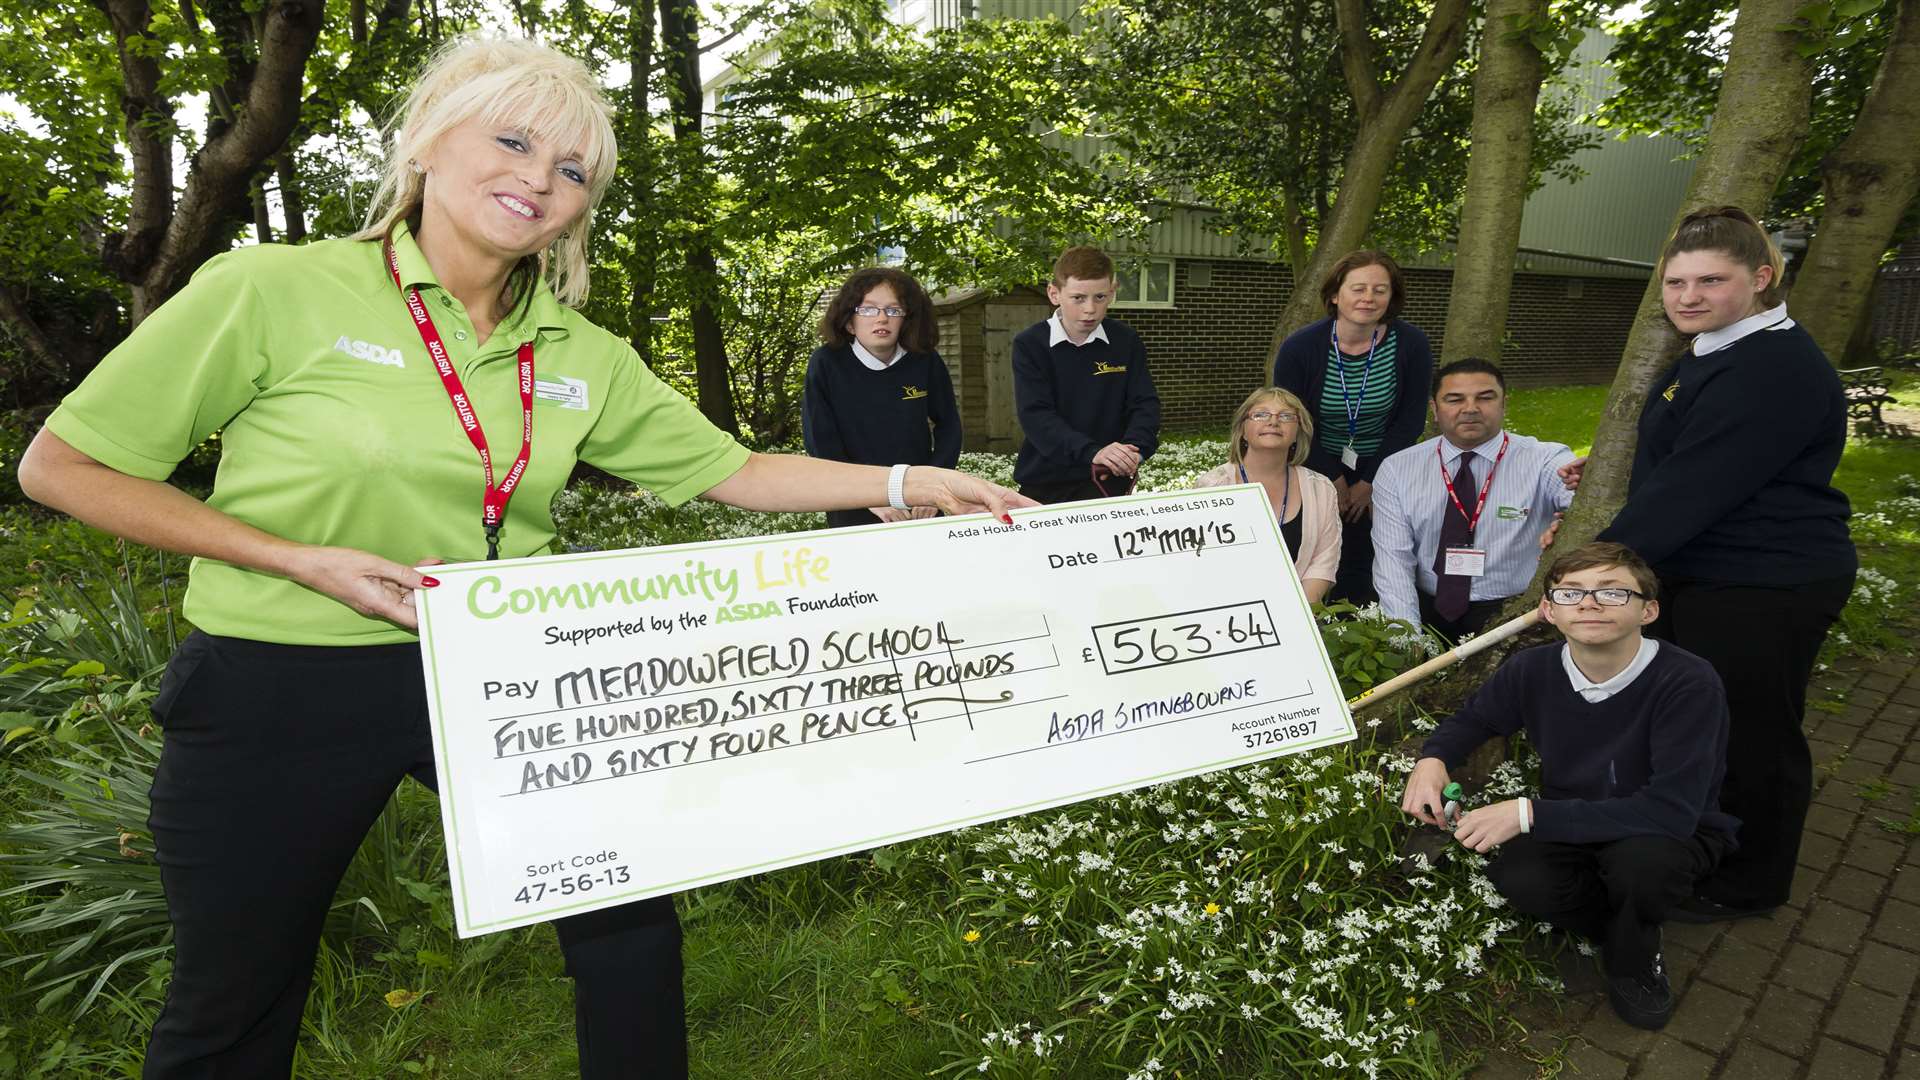 Asda's Claire Fosbeary presents a donation of more than £500 to the sensory garden project